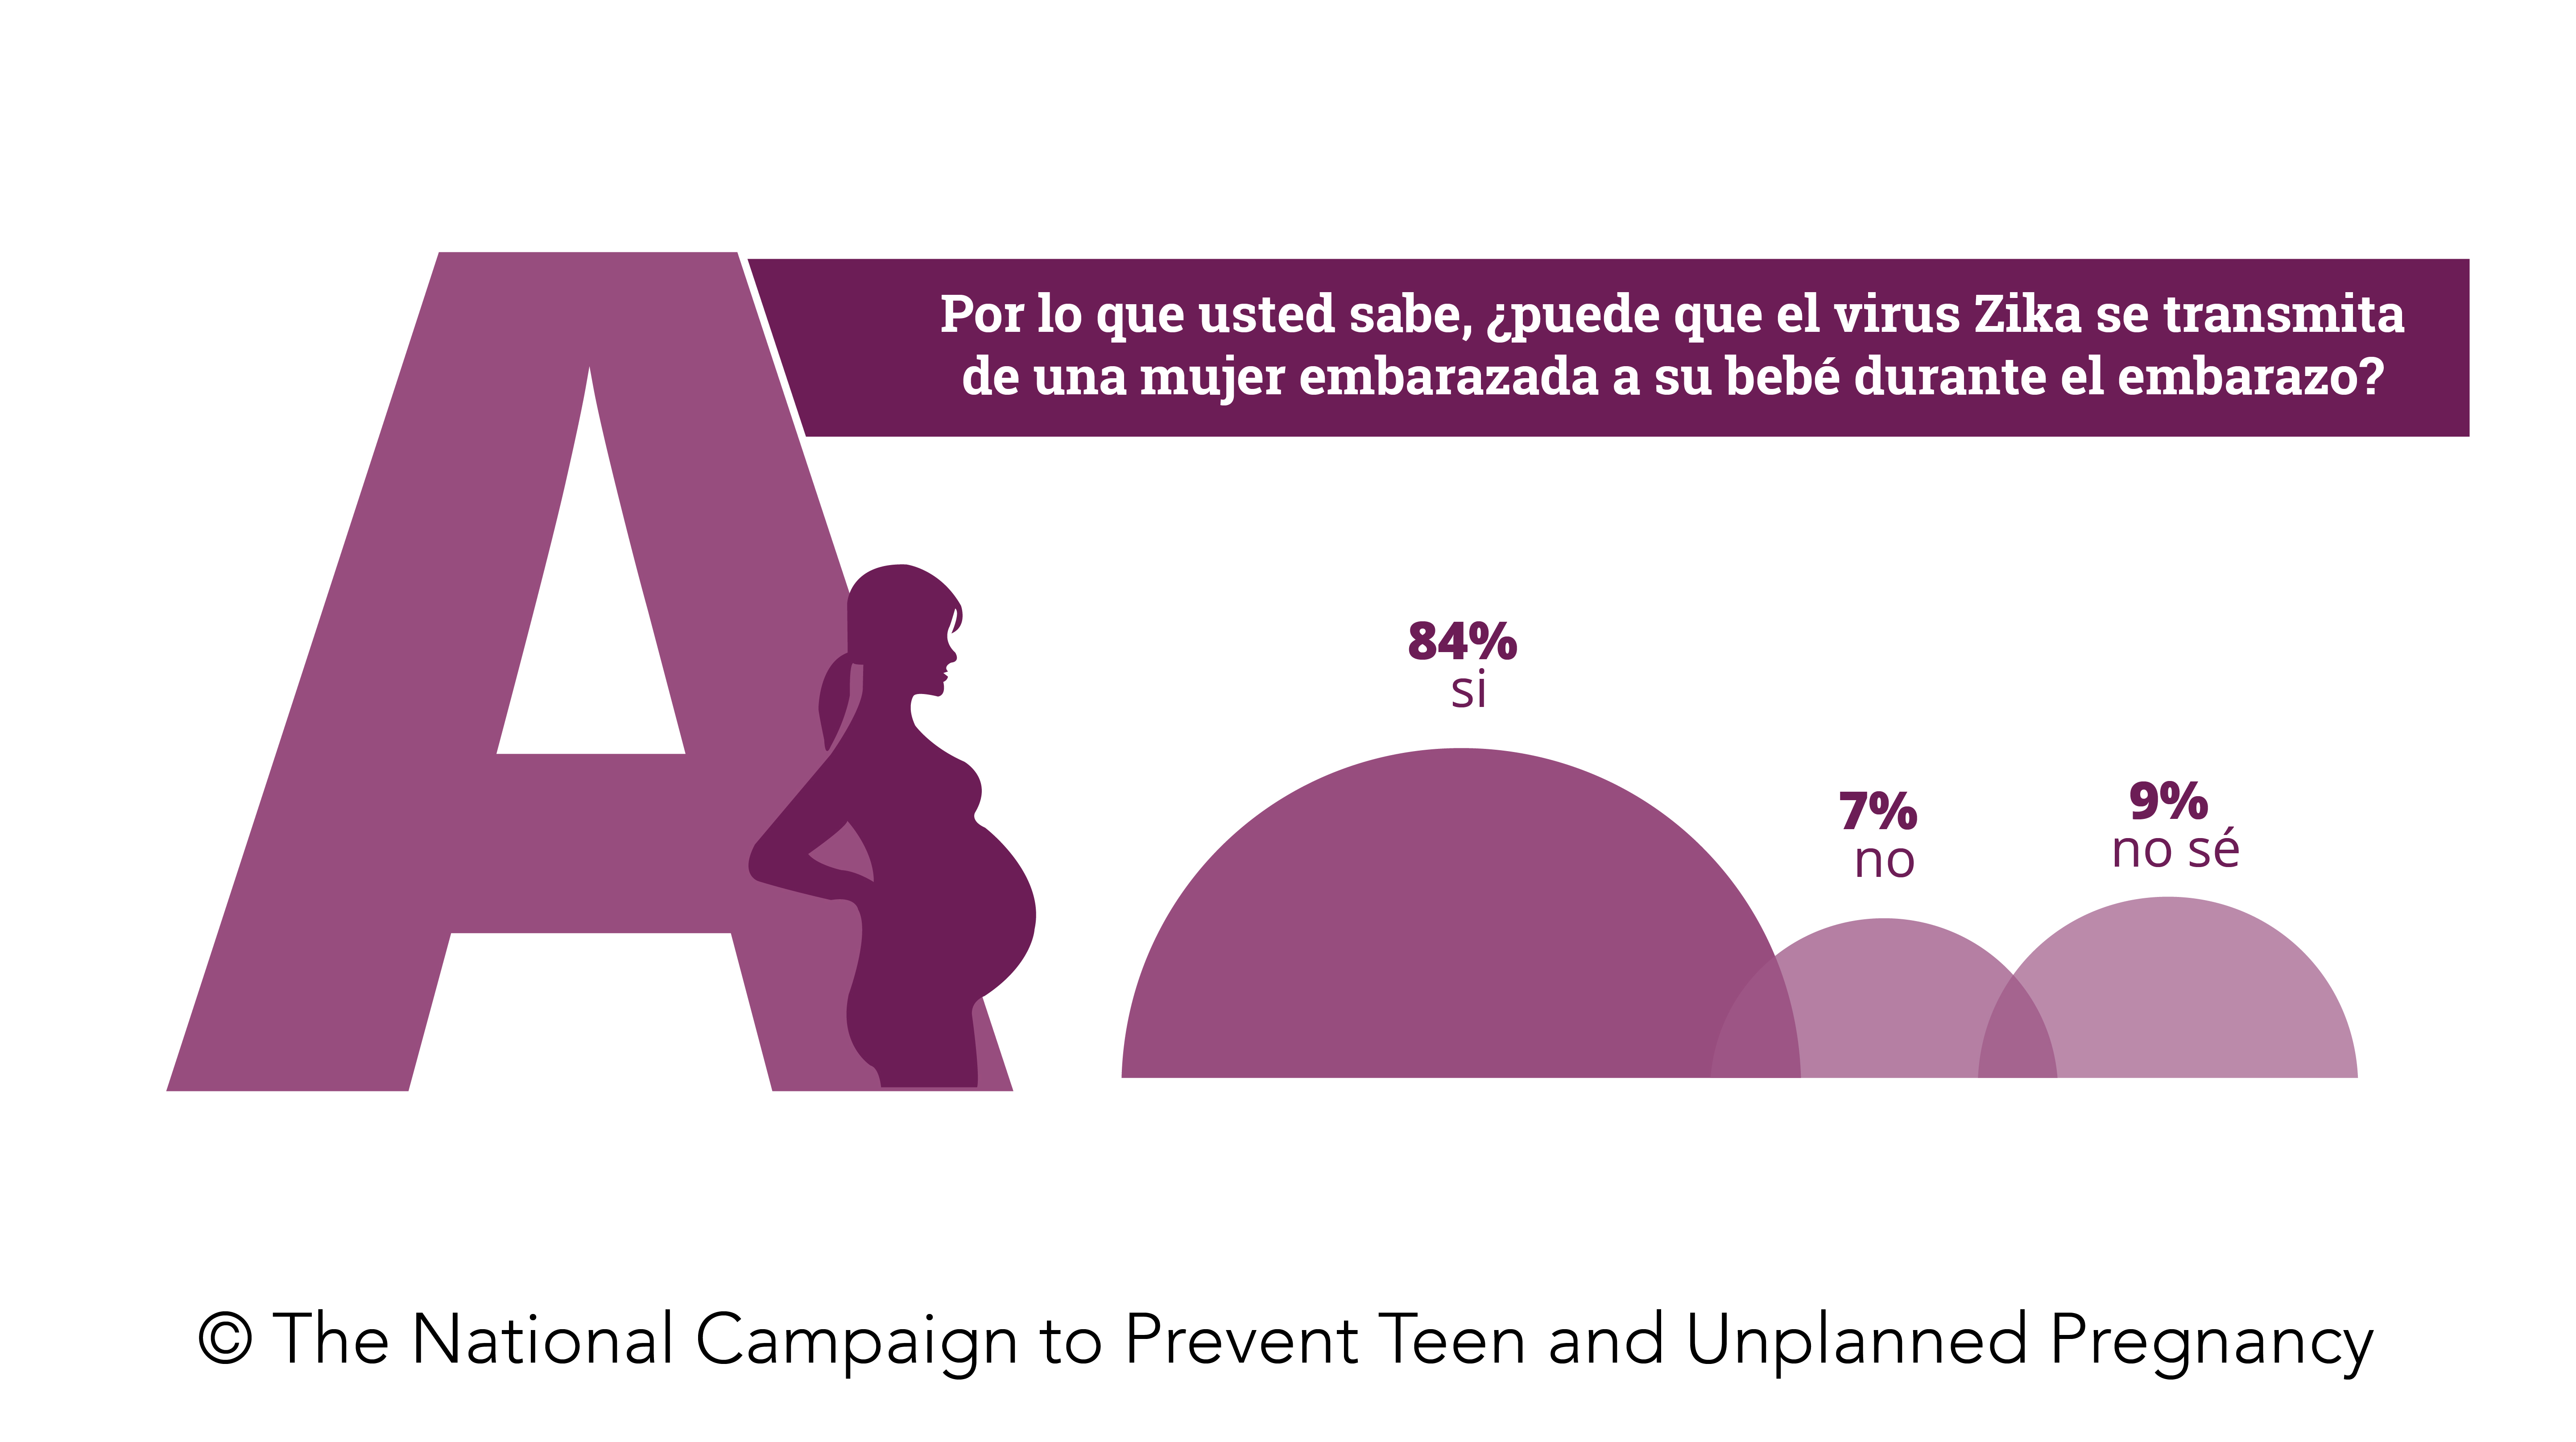 Survey Says: Unplanned Pregnancy and the Zika Virus (June 2016)